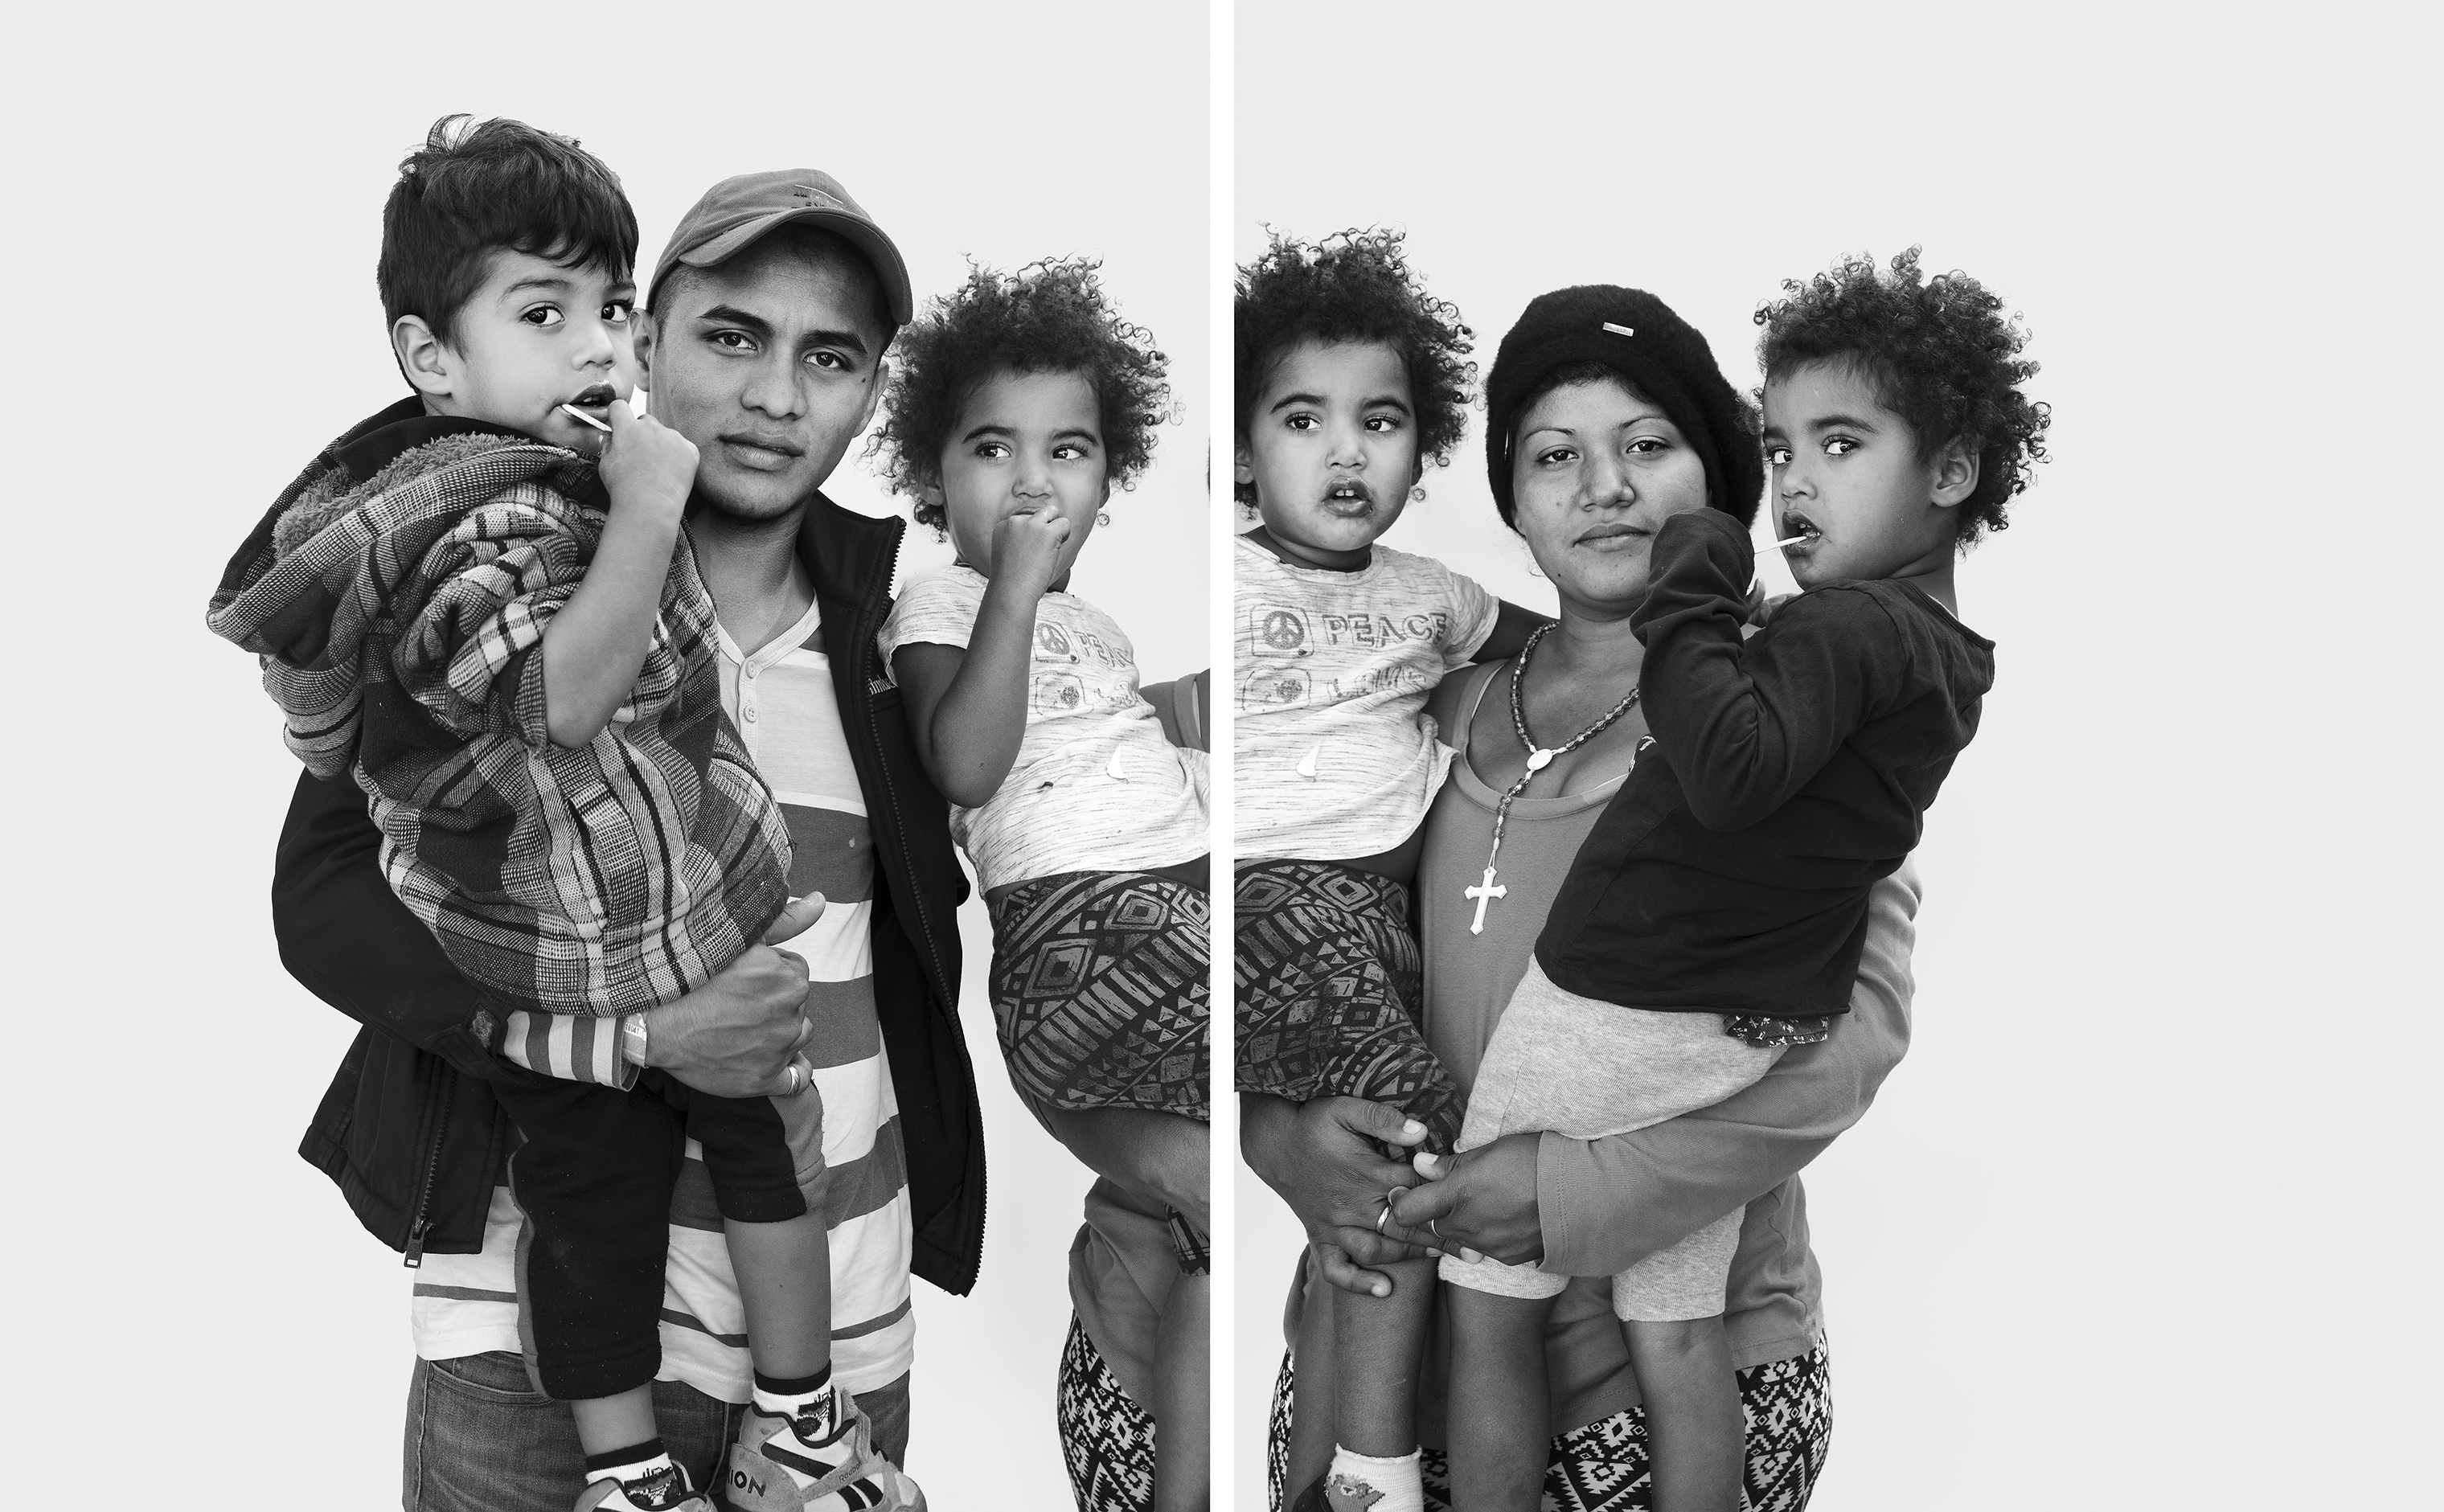 Francisco Soto, 23, and Darileni Rodríguez, 25, left their home in Honduras to join the migrant caravan with their three children in tow: Frederick Rodríguez, 2; Sharon Pérez Rodríguez, 3 (twin on left); and Rous Pérez Rodríguez, 3 (twin on right) (Davide Monteleone for TIME)